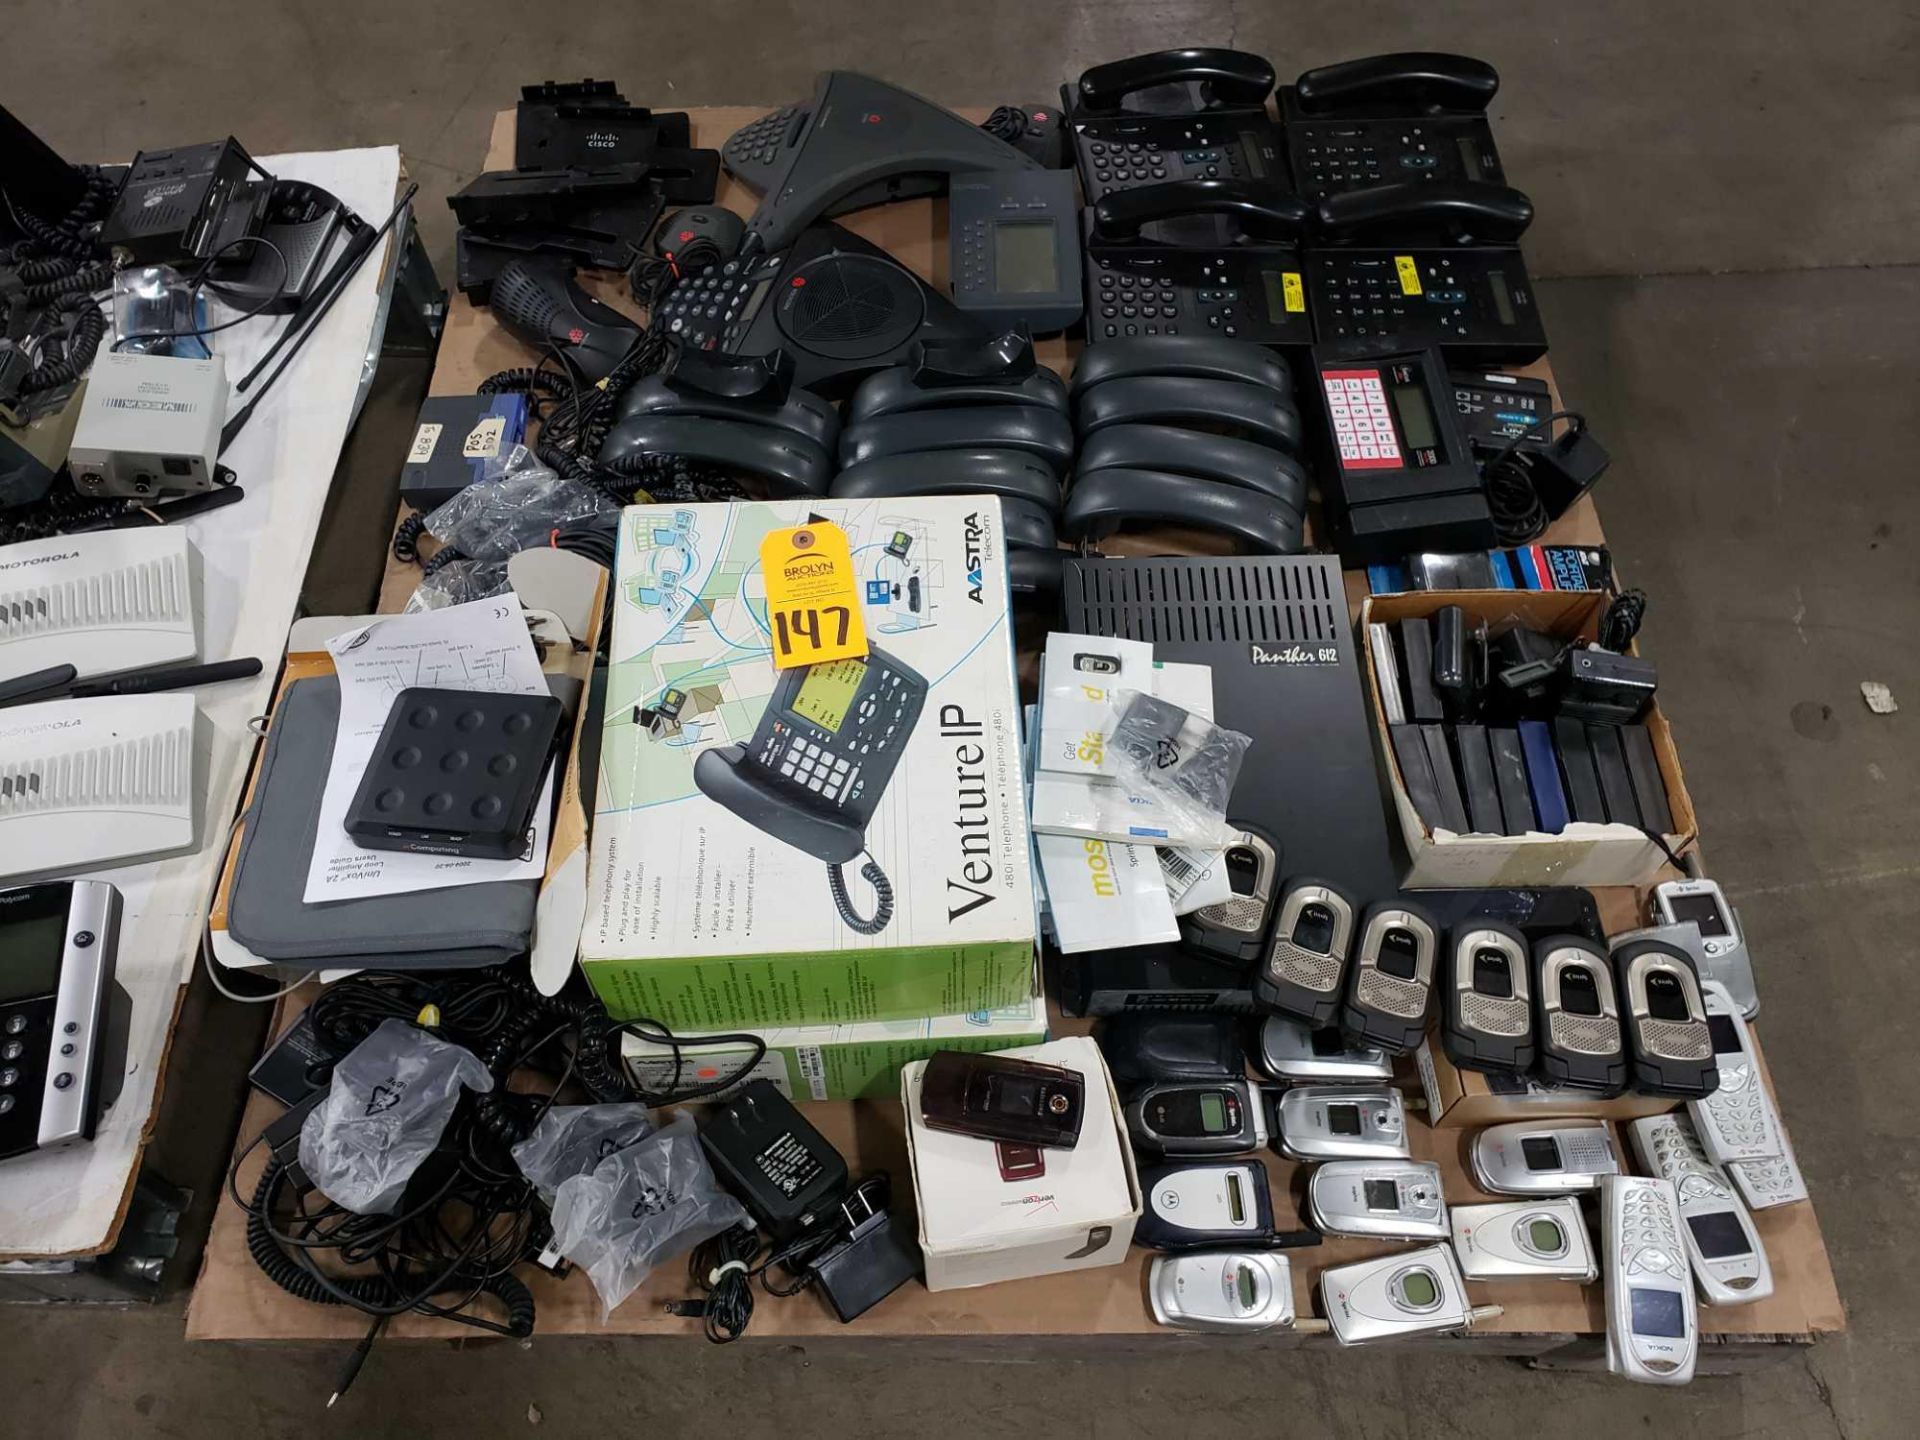 Pallet of assorted phones, polycom units, walkie talkies, cell phones, etc.